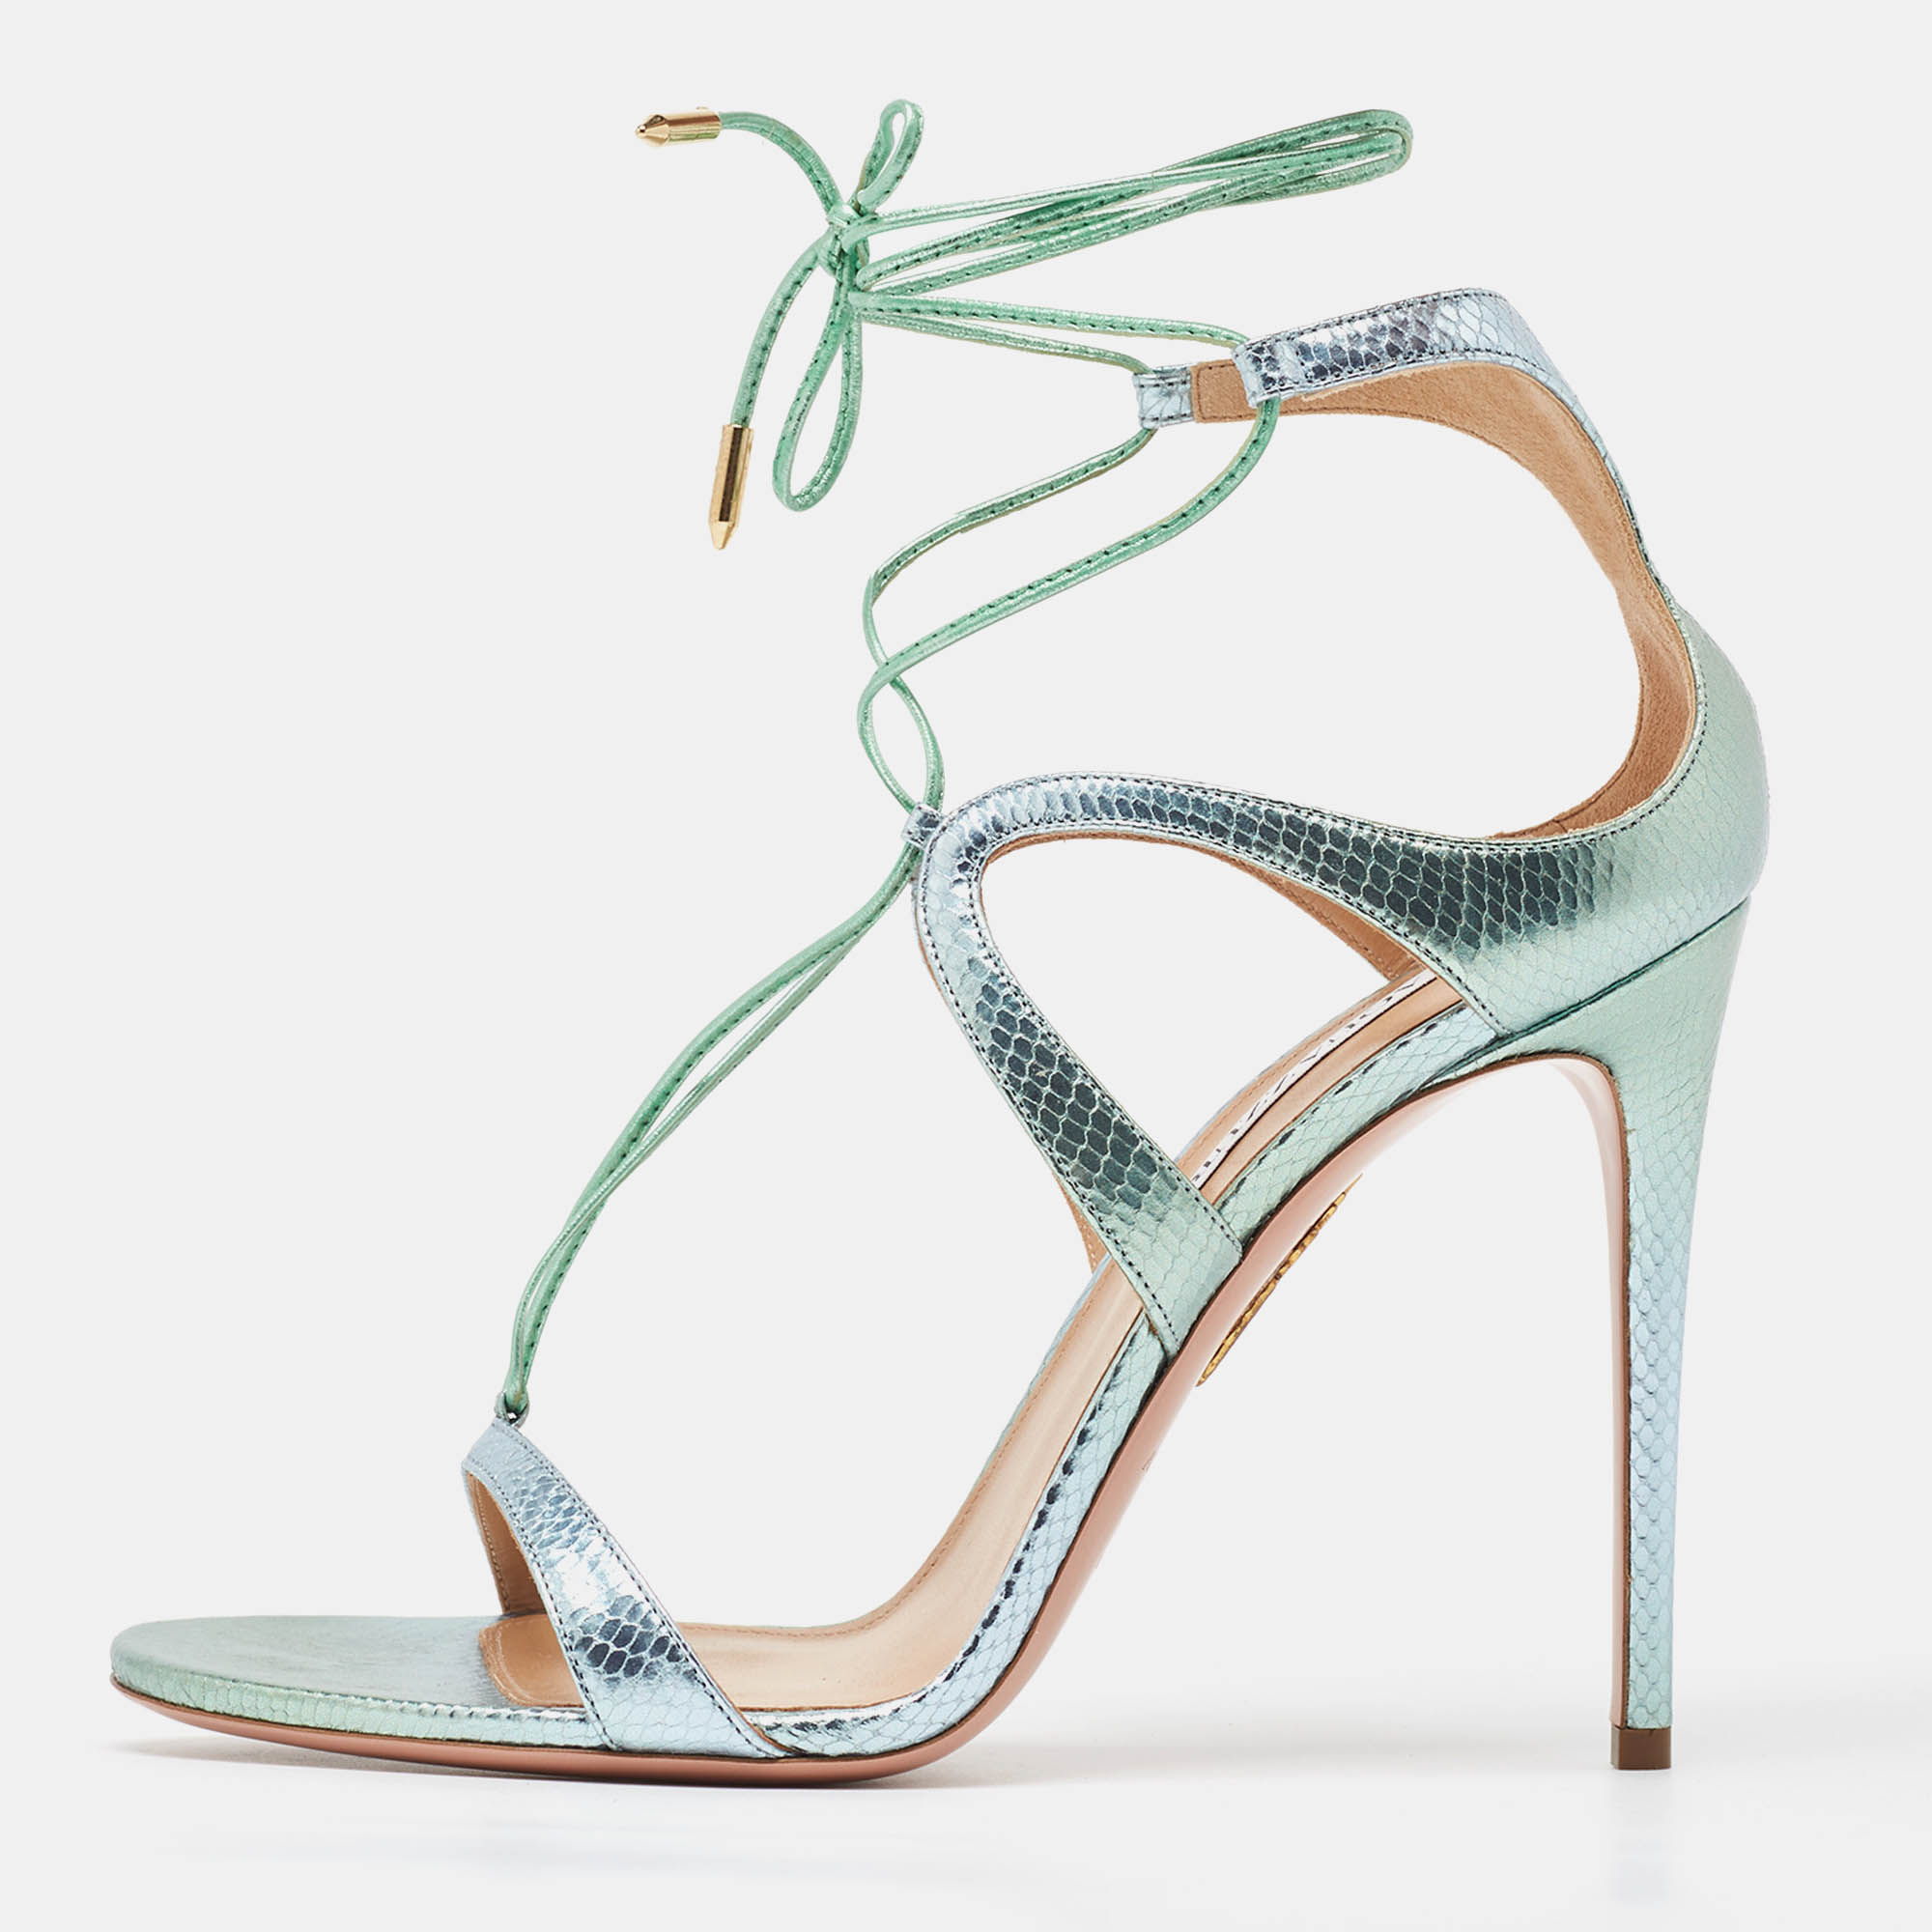 Aquazzura green/silver python embossed leather ankle strap sandals size 40